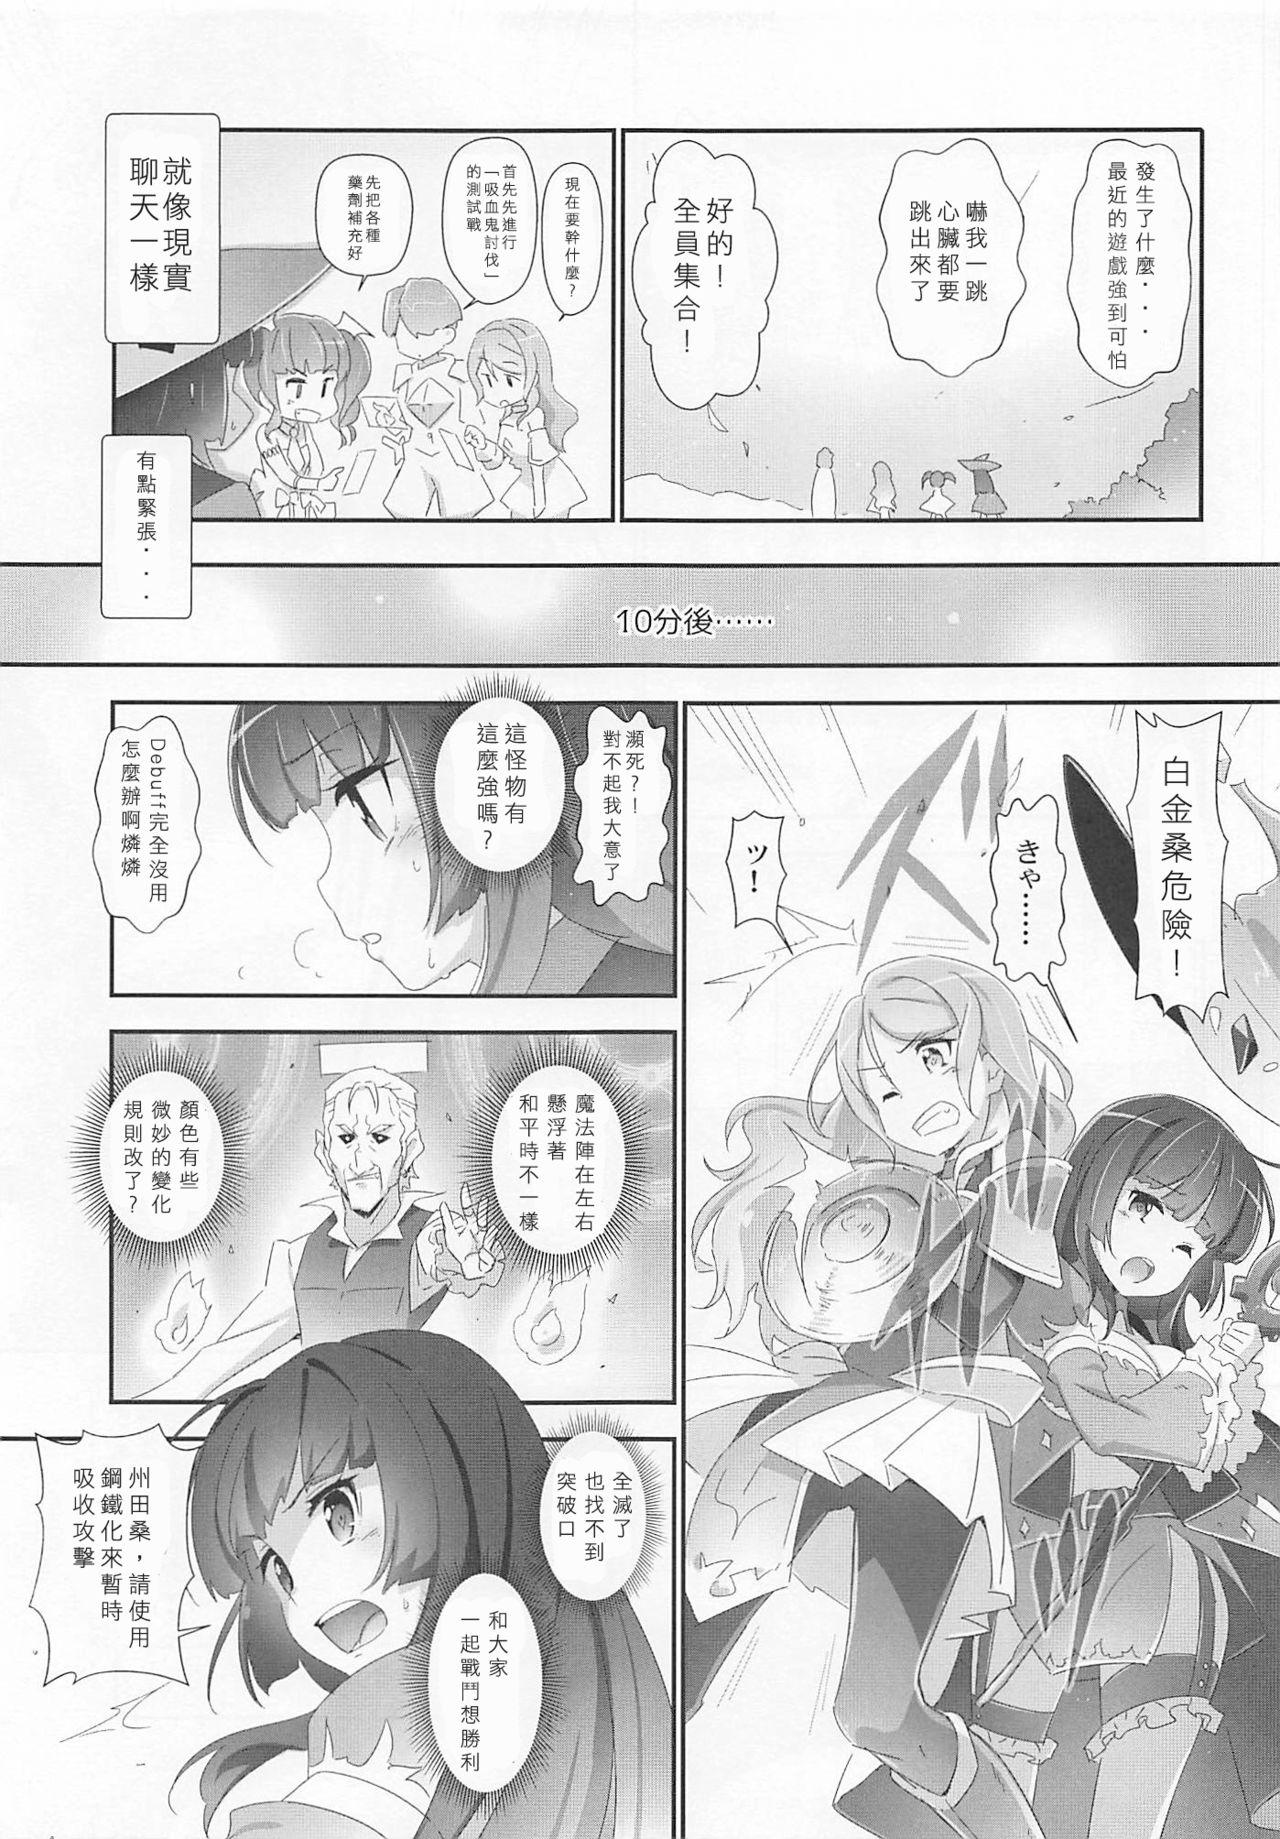 Perfect Butt EroYoro? 9 - Bang dream Step - Page 6